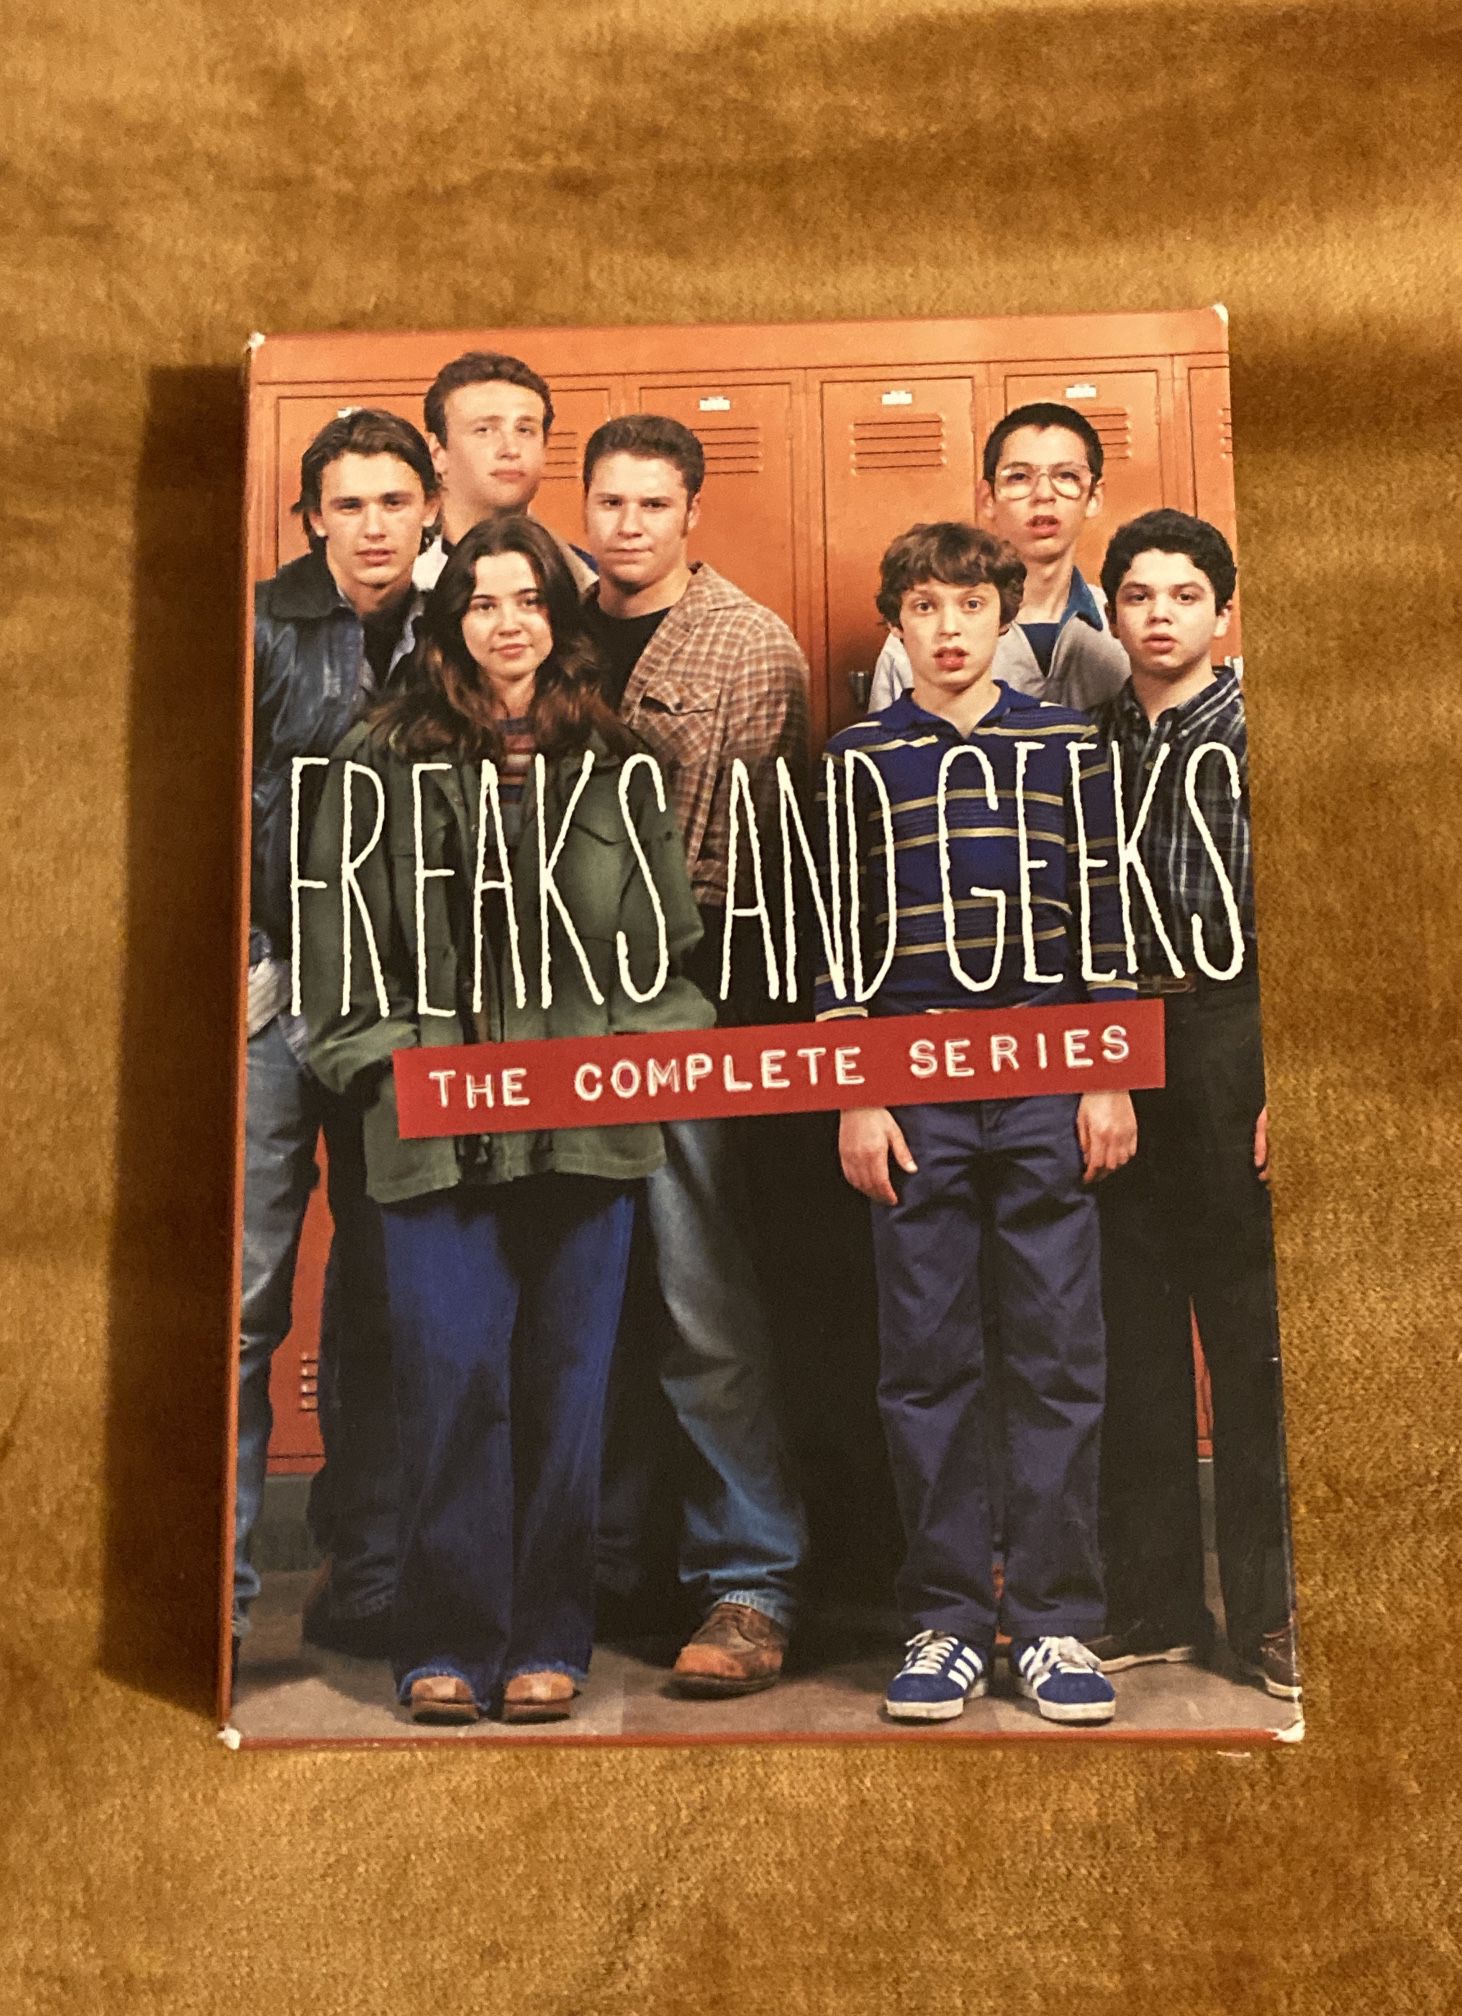 Freaks and Geeks: The Complete Series DVD Set